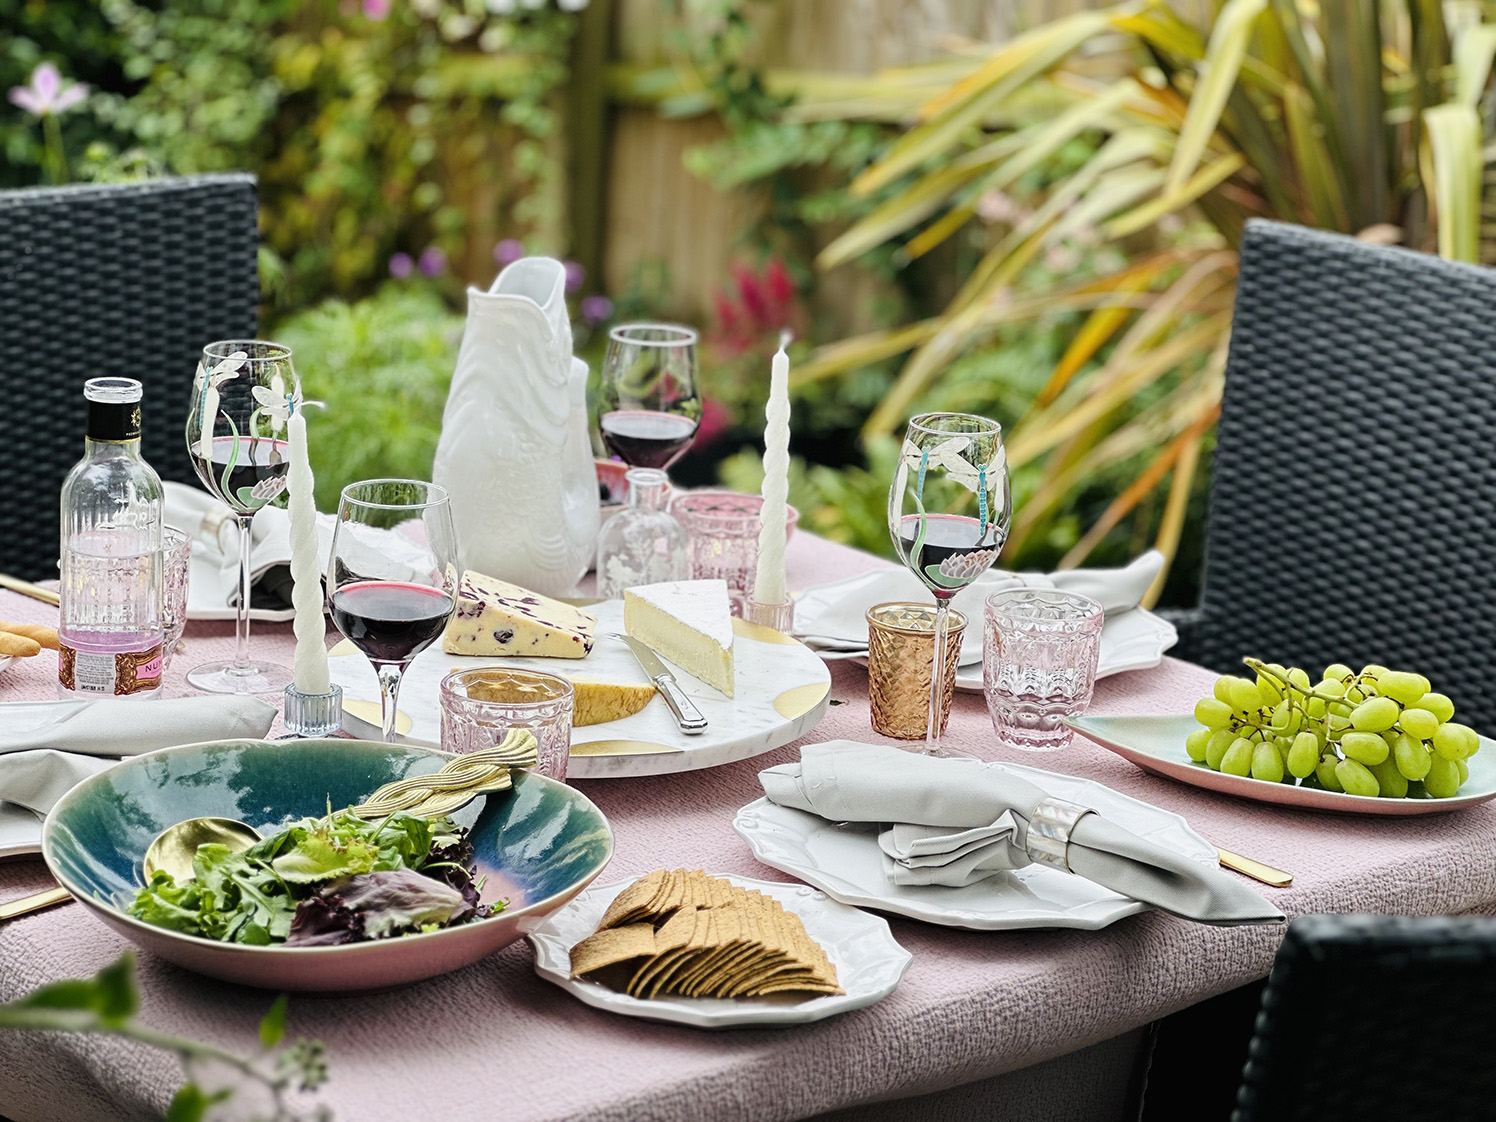 Cheese and wine tablescape designed by Emma Green for outdoor dining